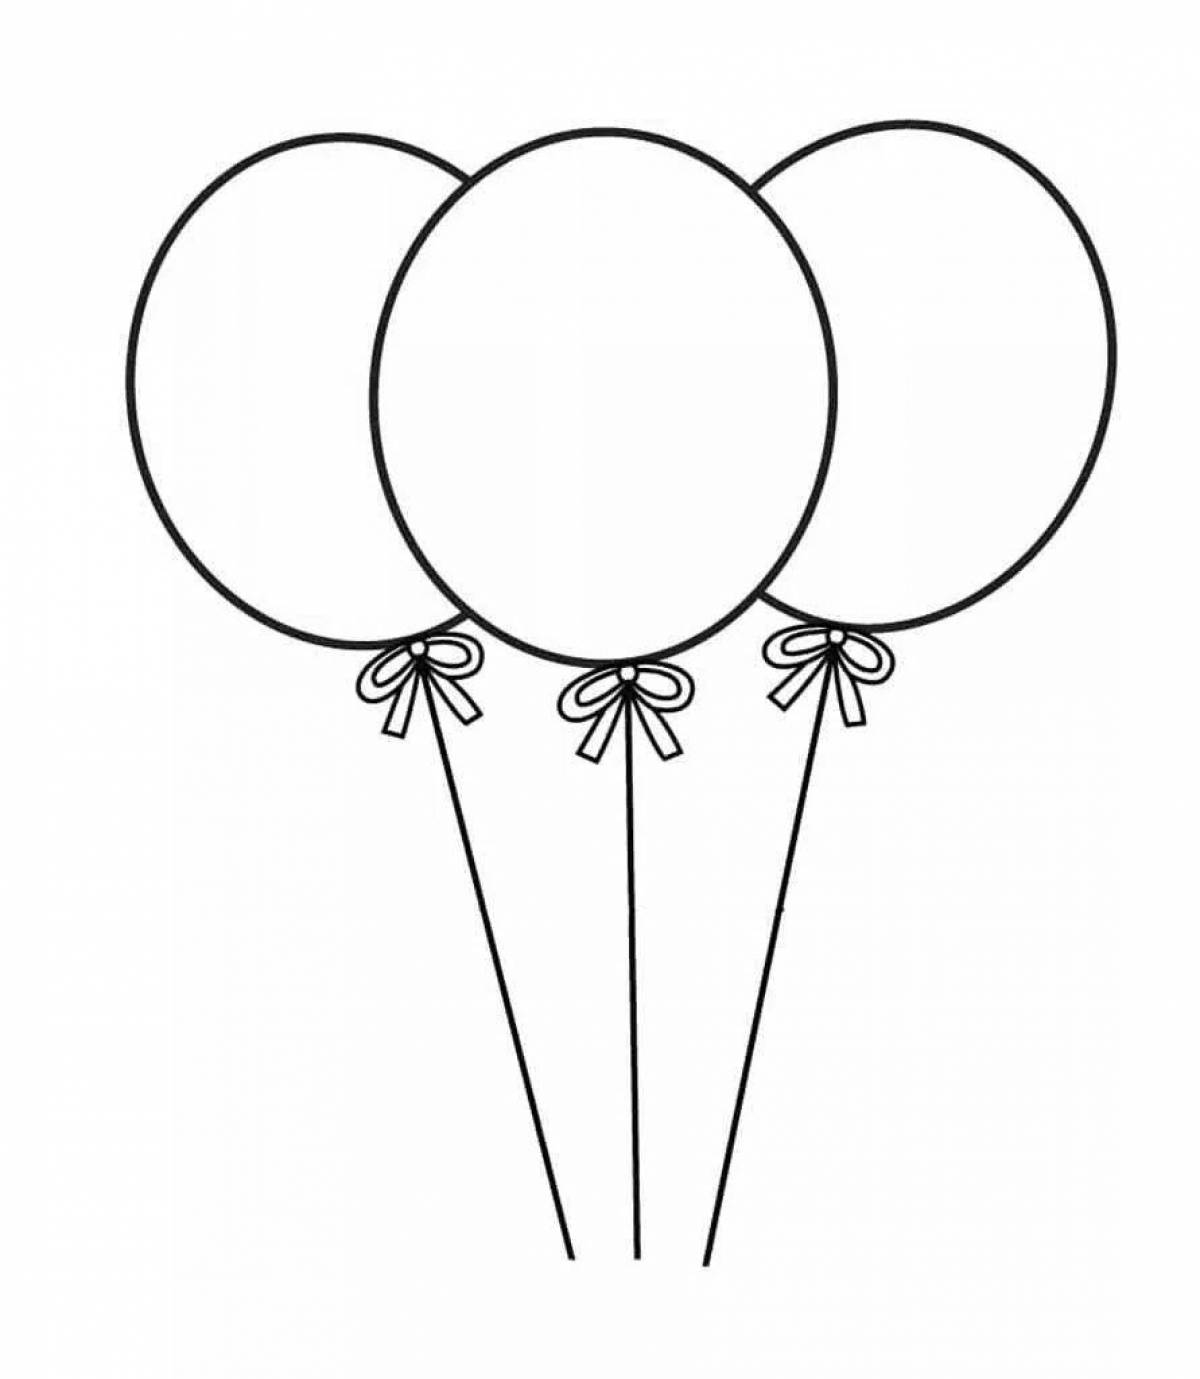 A playful balloon coloring book for 3-4 year olds